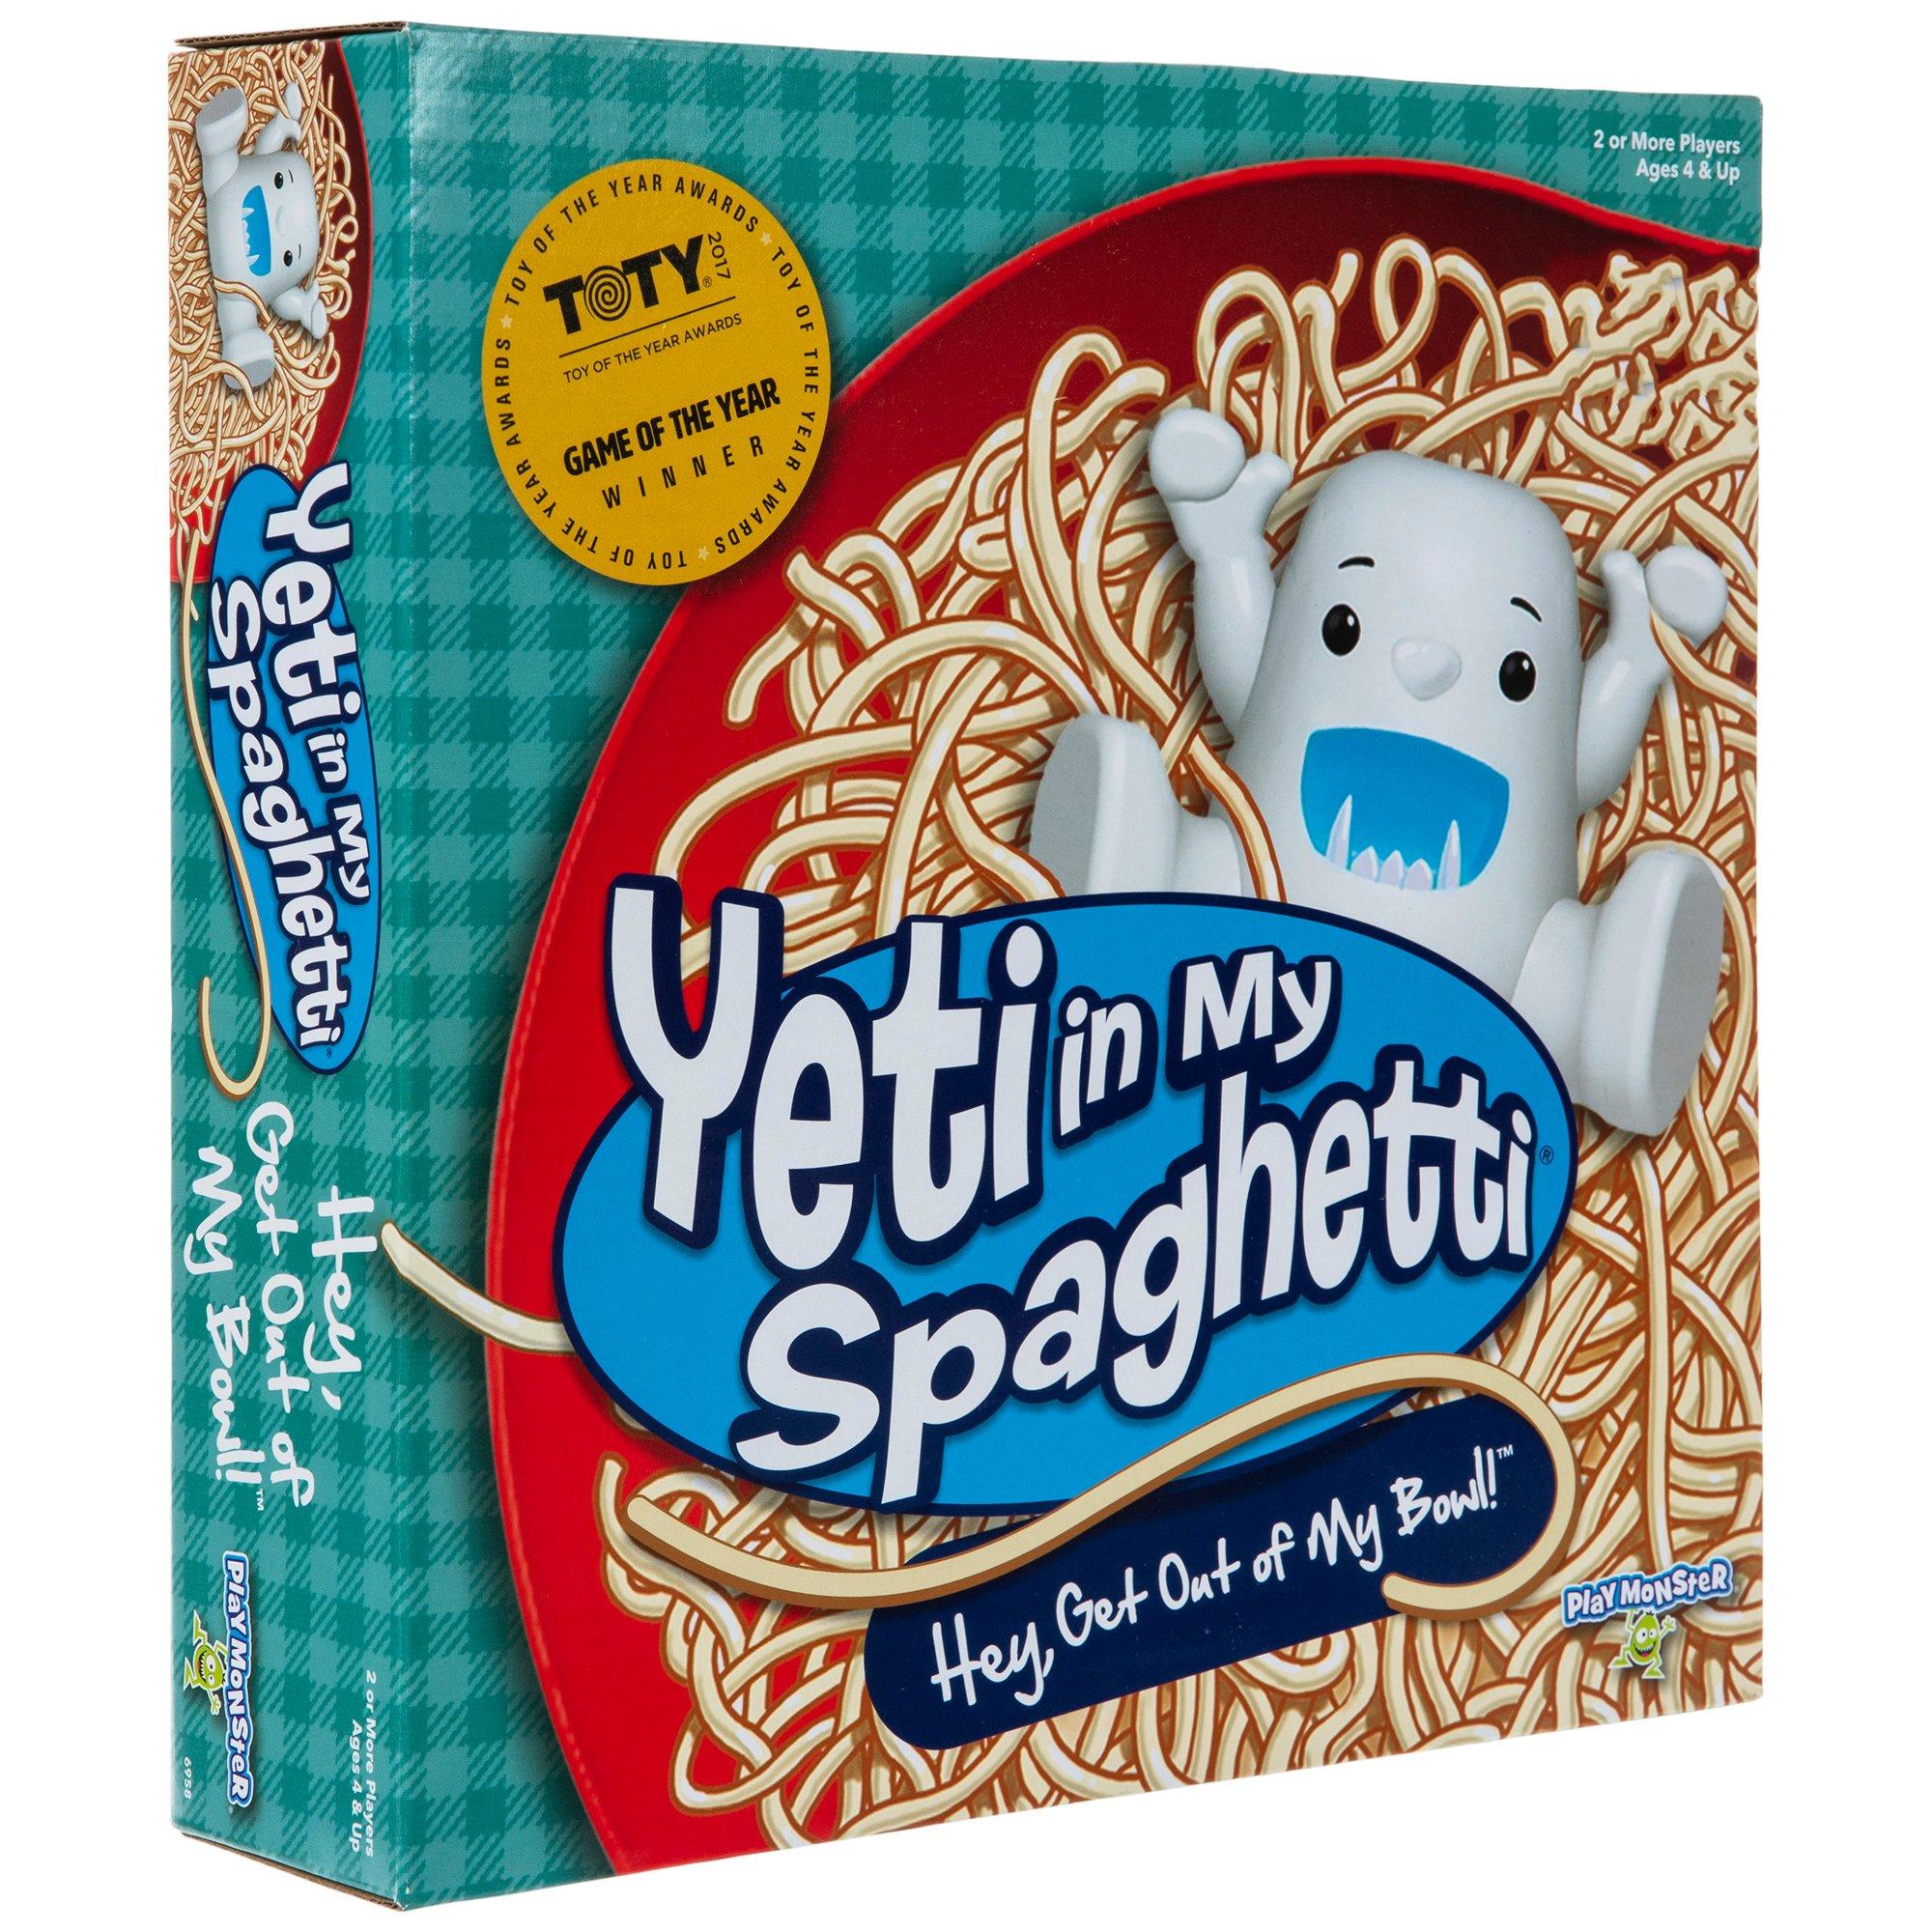 Yeti In My Spaghetti Game Replacement Pieces Parts - You Choose Pieces  Needed